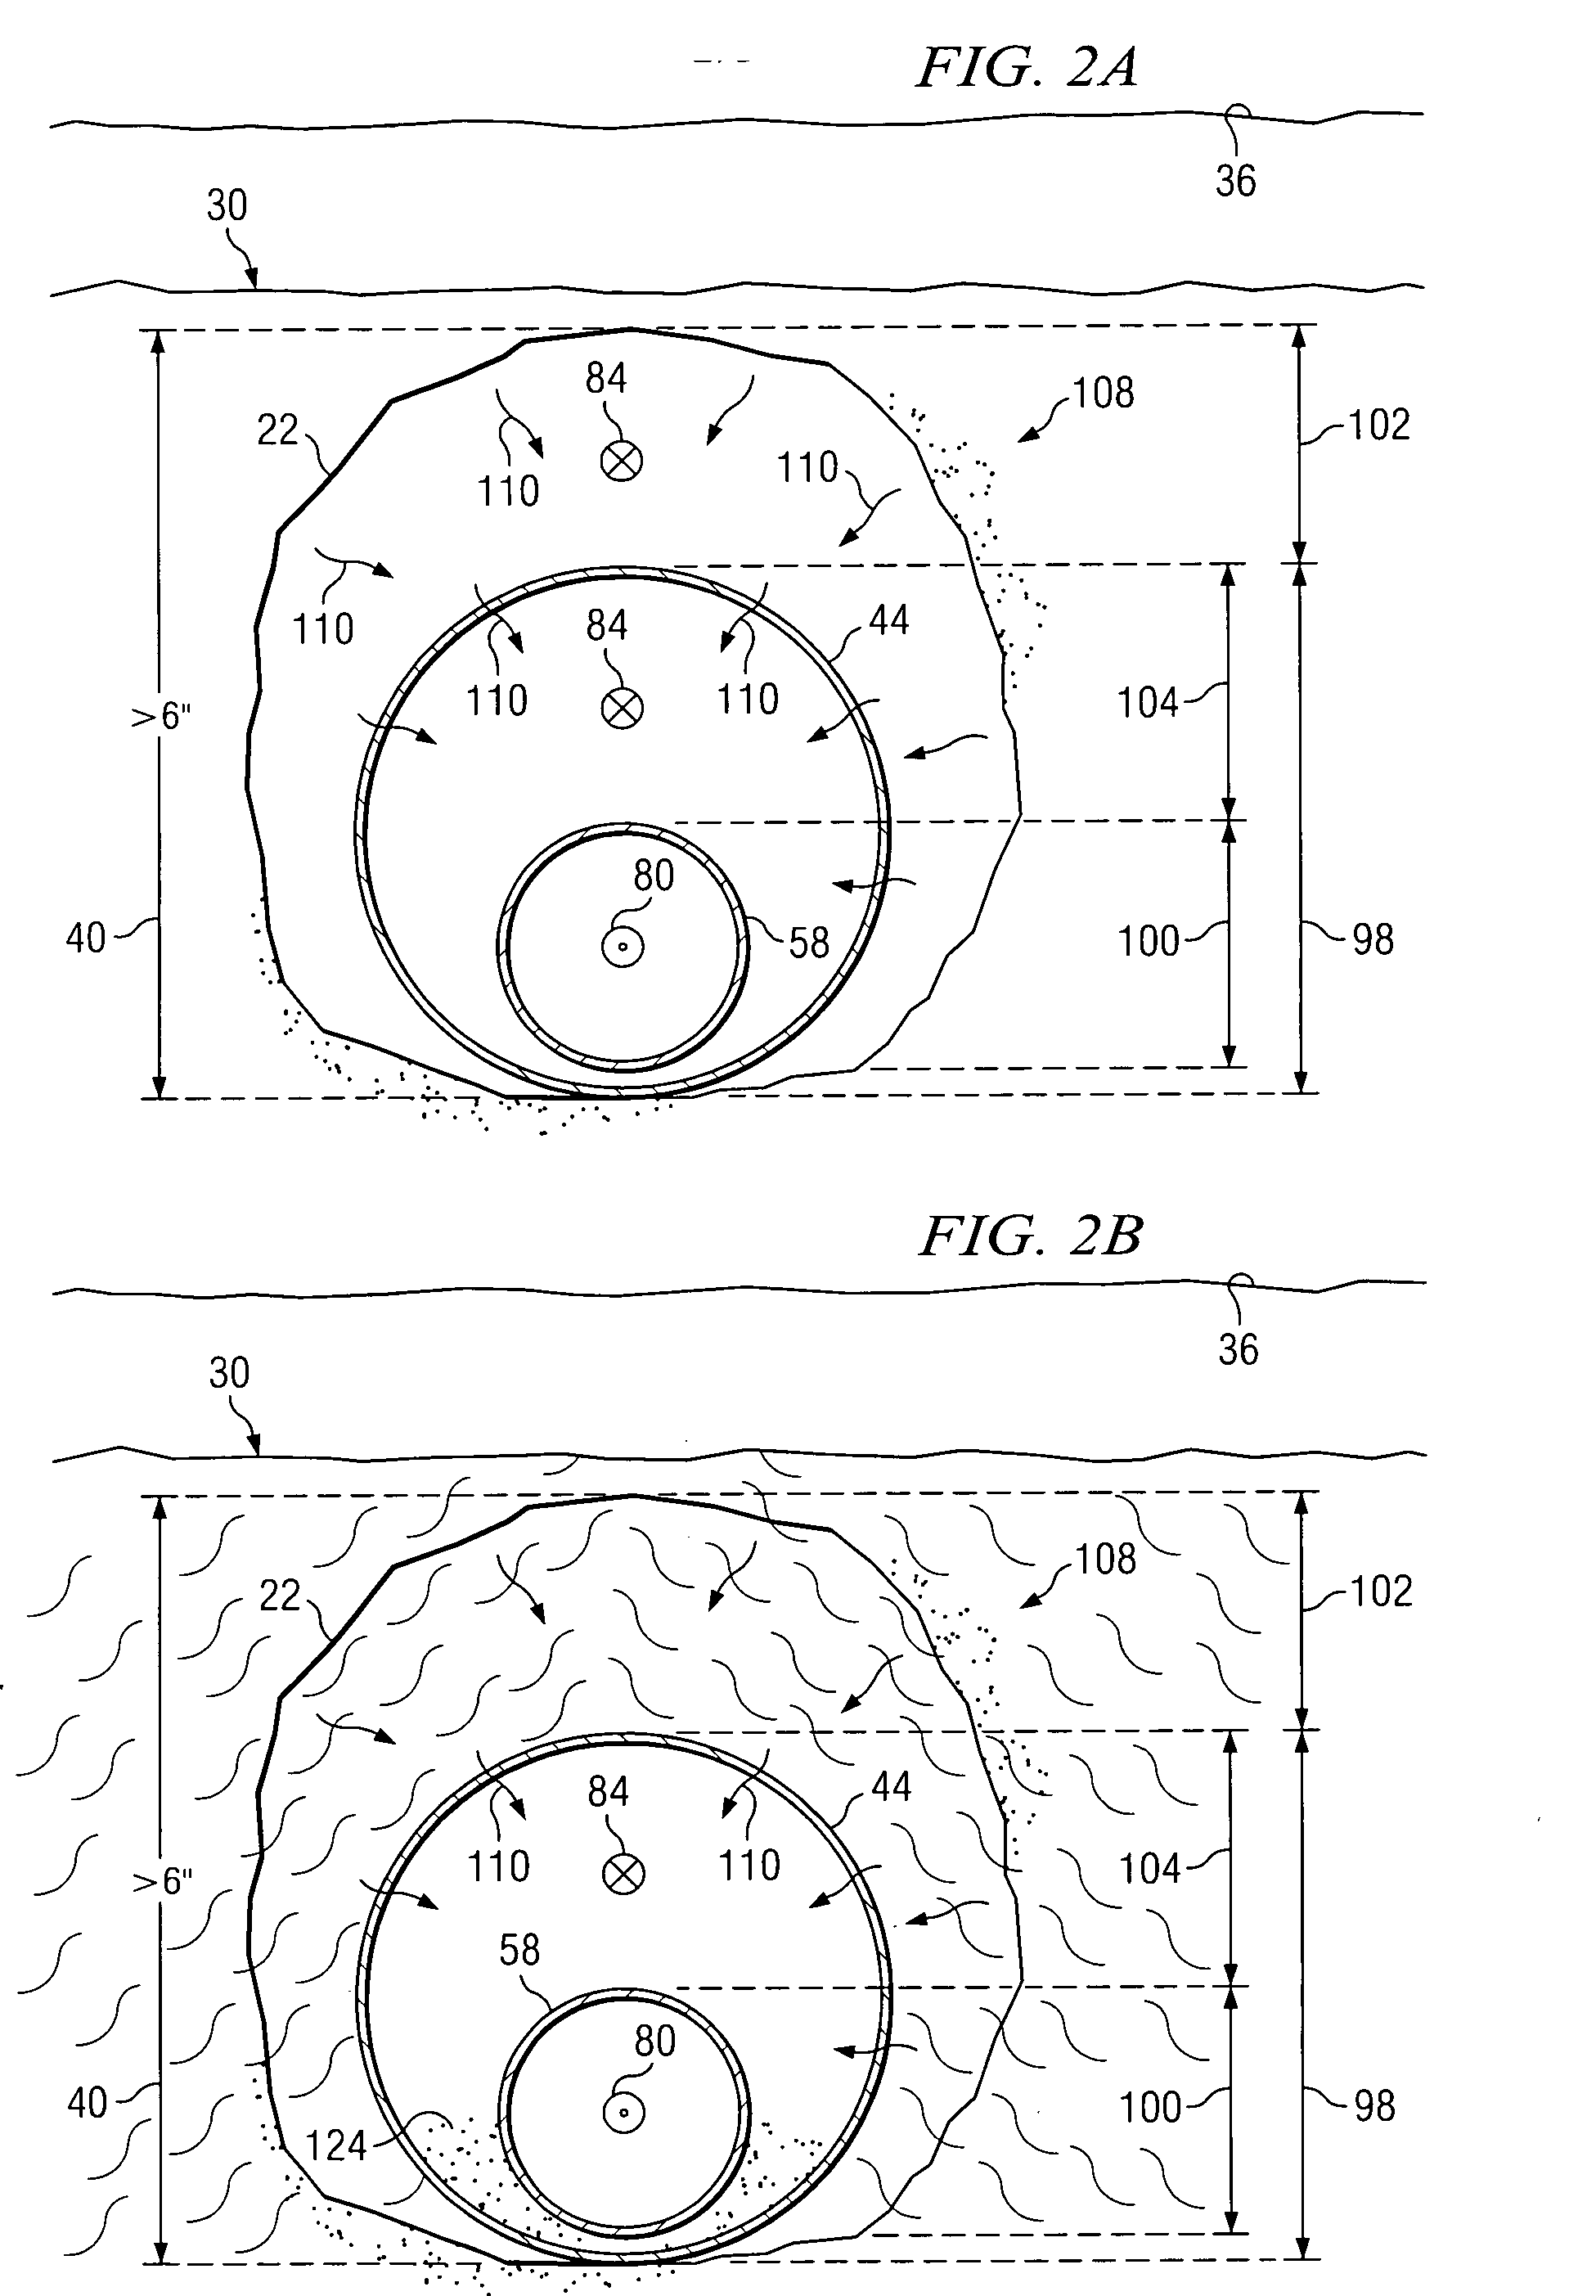 Method and system for extraction of resources from a subterranean well bore